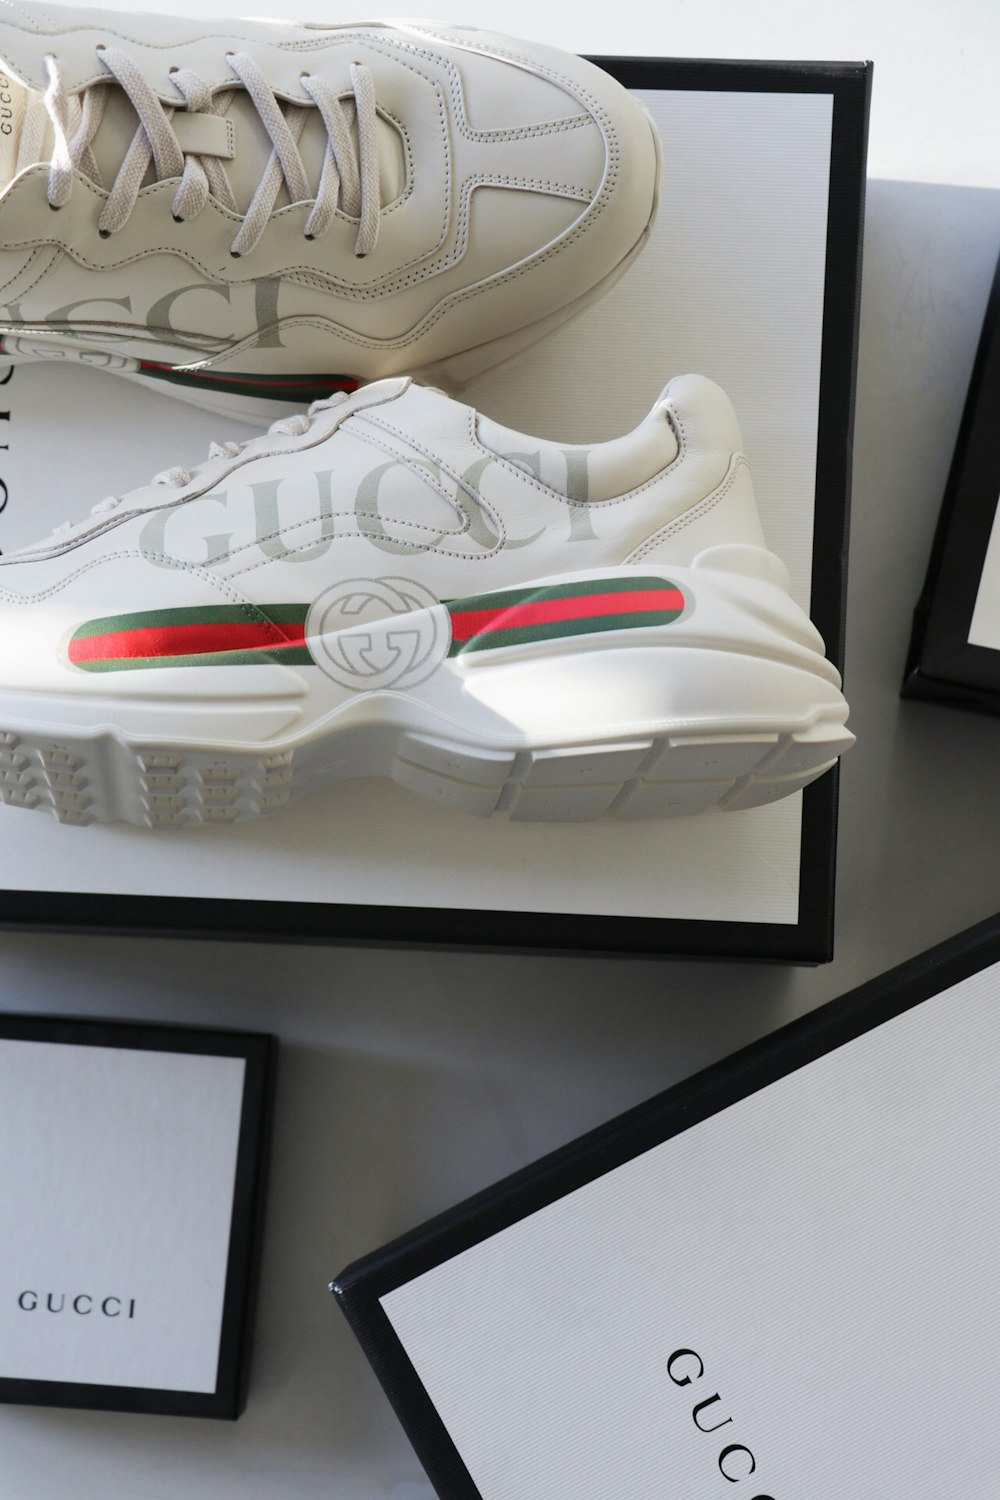 pair of white-red-green Gucci sneakers with box